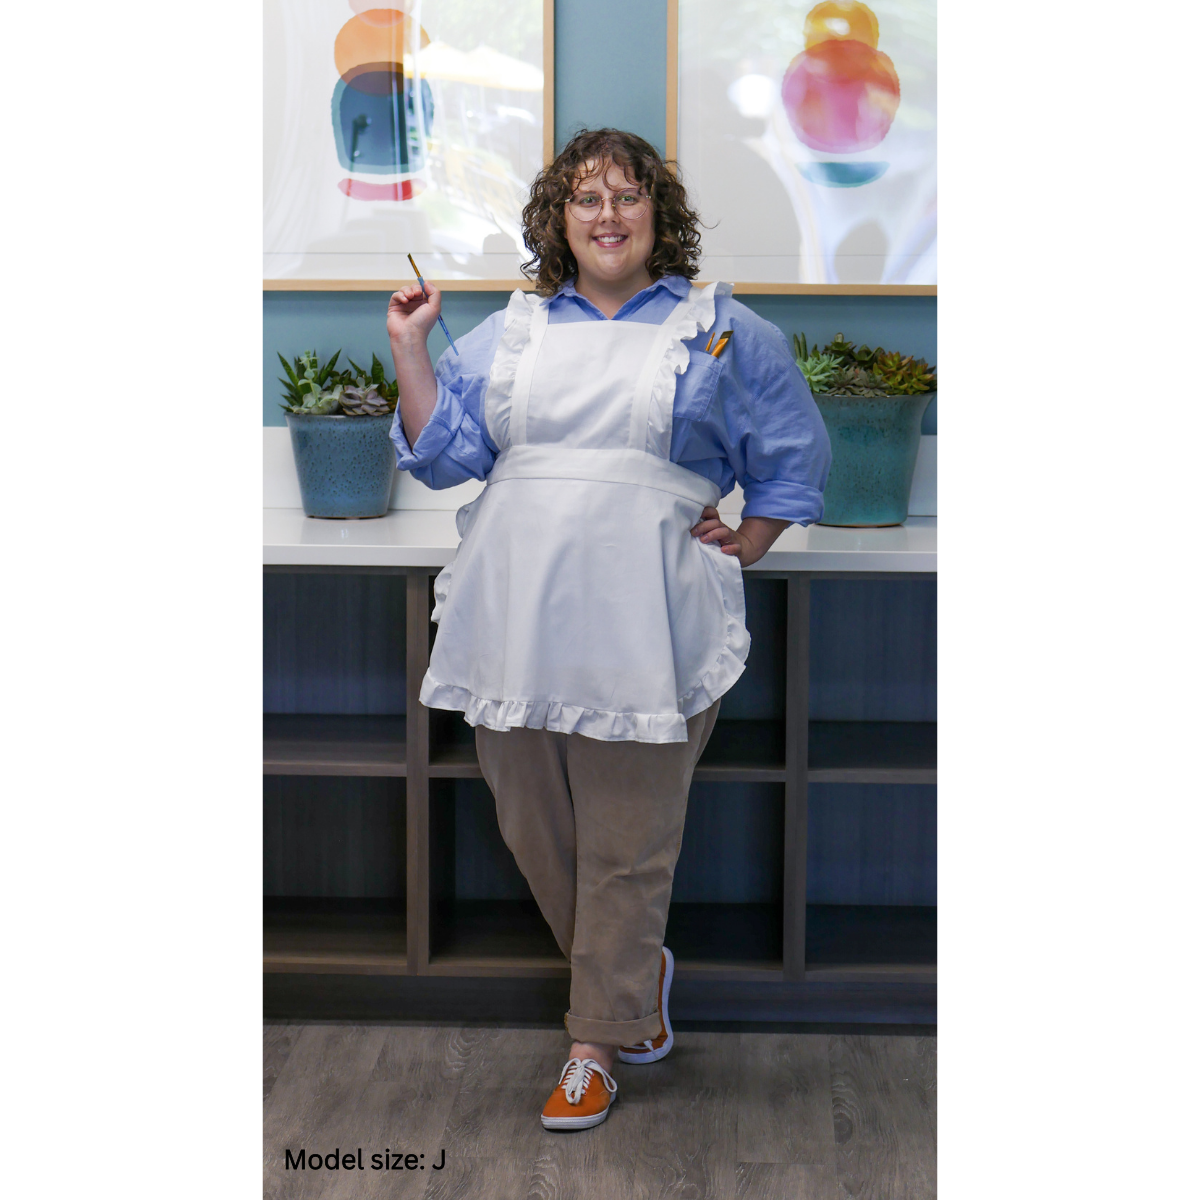 A white apron being worn by a female plus-size model. The model is facing the camera, smiling, and posing with one hand on her hip and holding a paintbrush in the other hand. The model is size J.